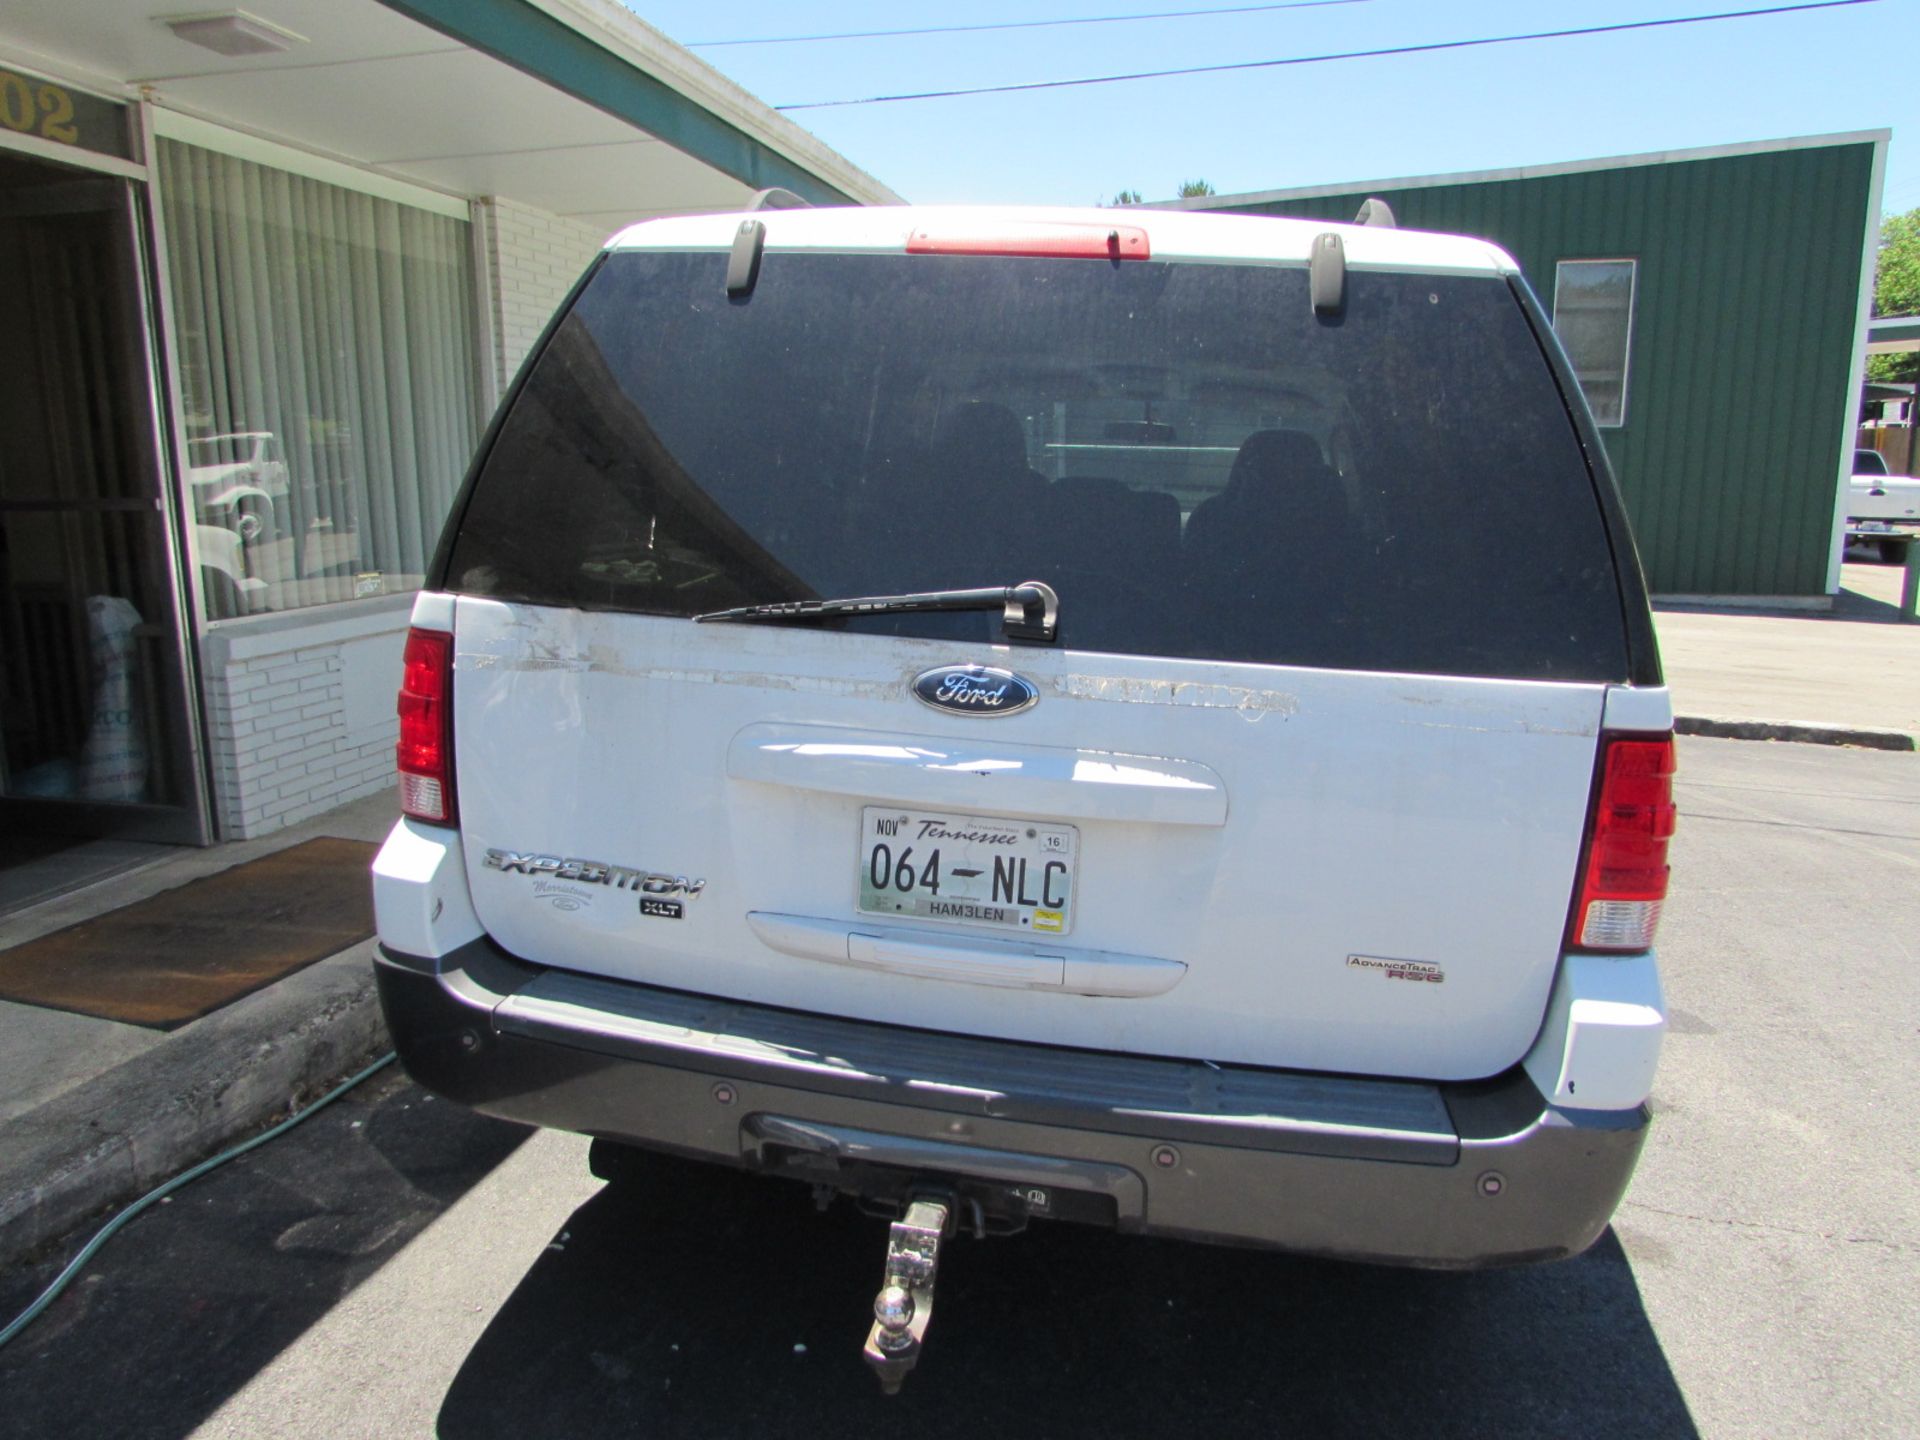 2006 Ford Expedition, V-8 Automatic, Leather, Power Windows, Power Door, 2-WD ODO 70,341, Vin - Image 3 of 5